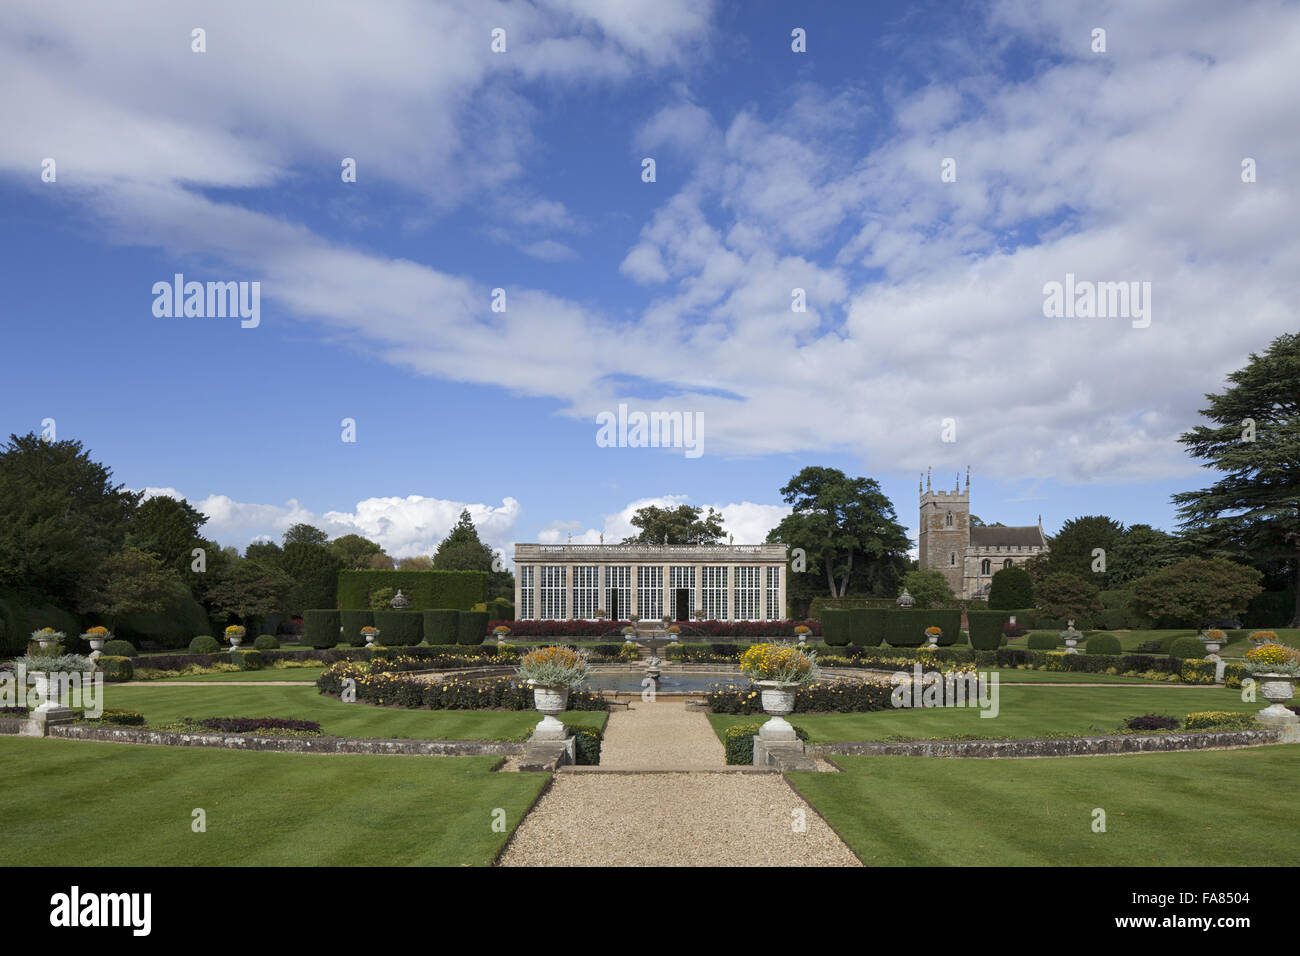 The Orangery and Italian Garden at Belton House, Lincolnshire. The Orangery was designed by Wyatville and built in 1819. Stock Photo